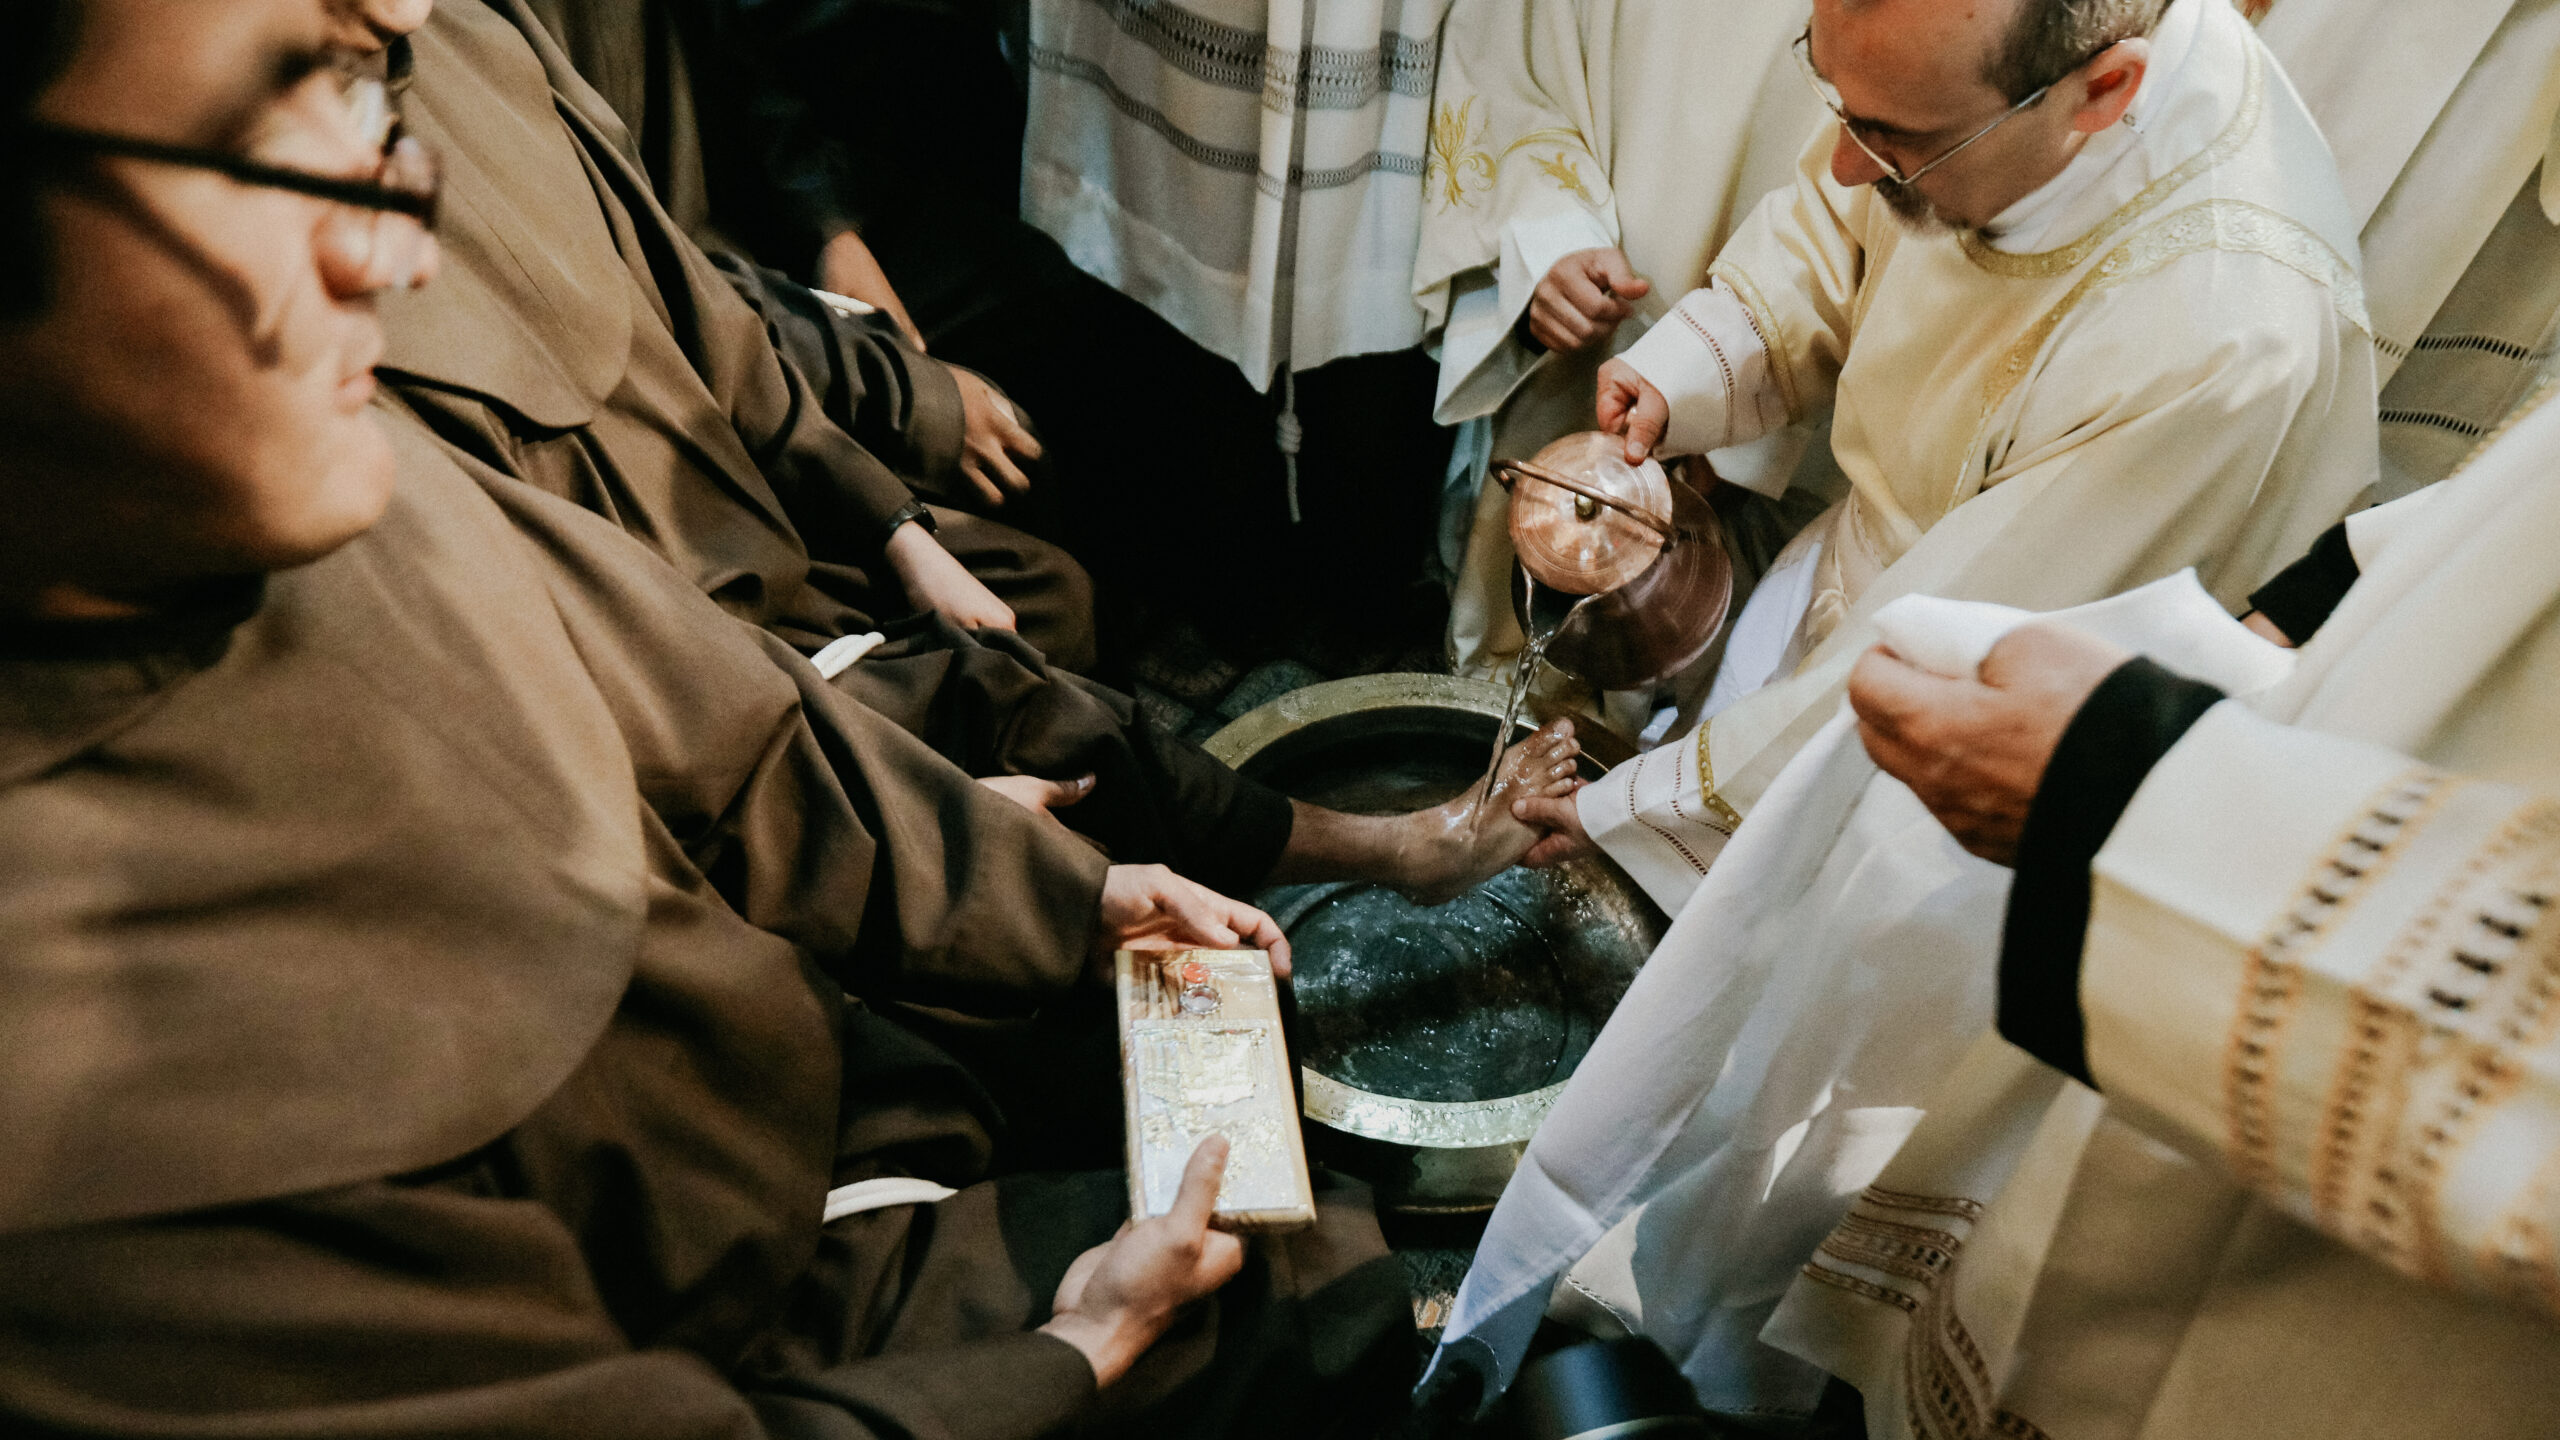 Priests gathered around the washing of the feet